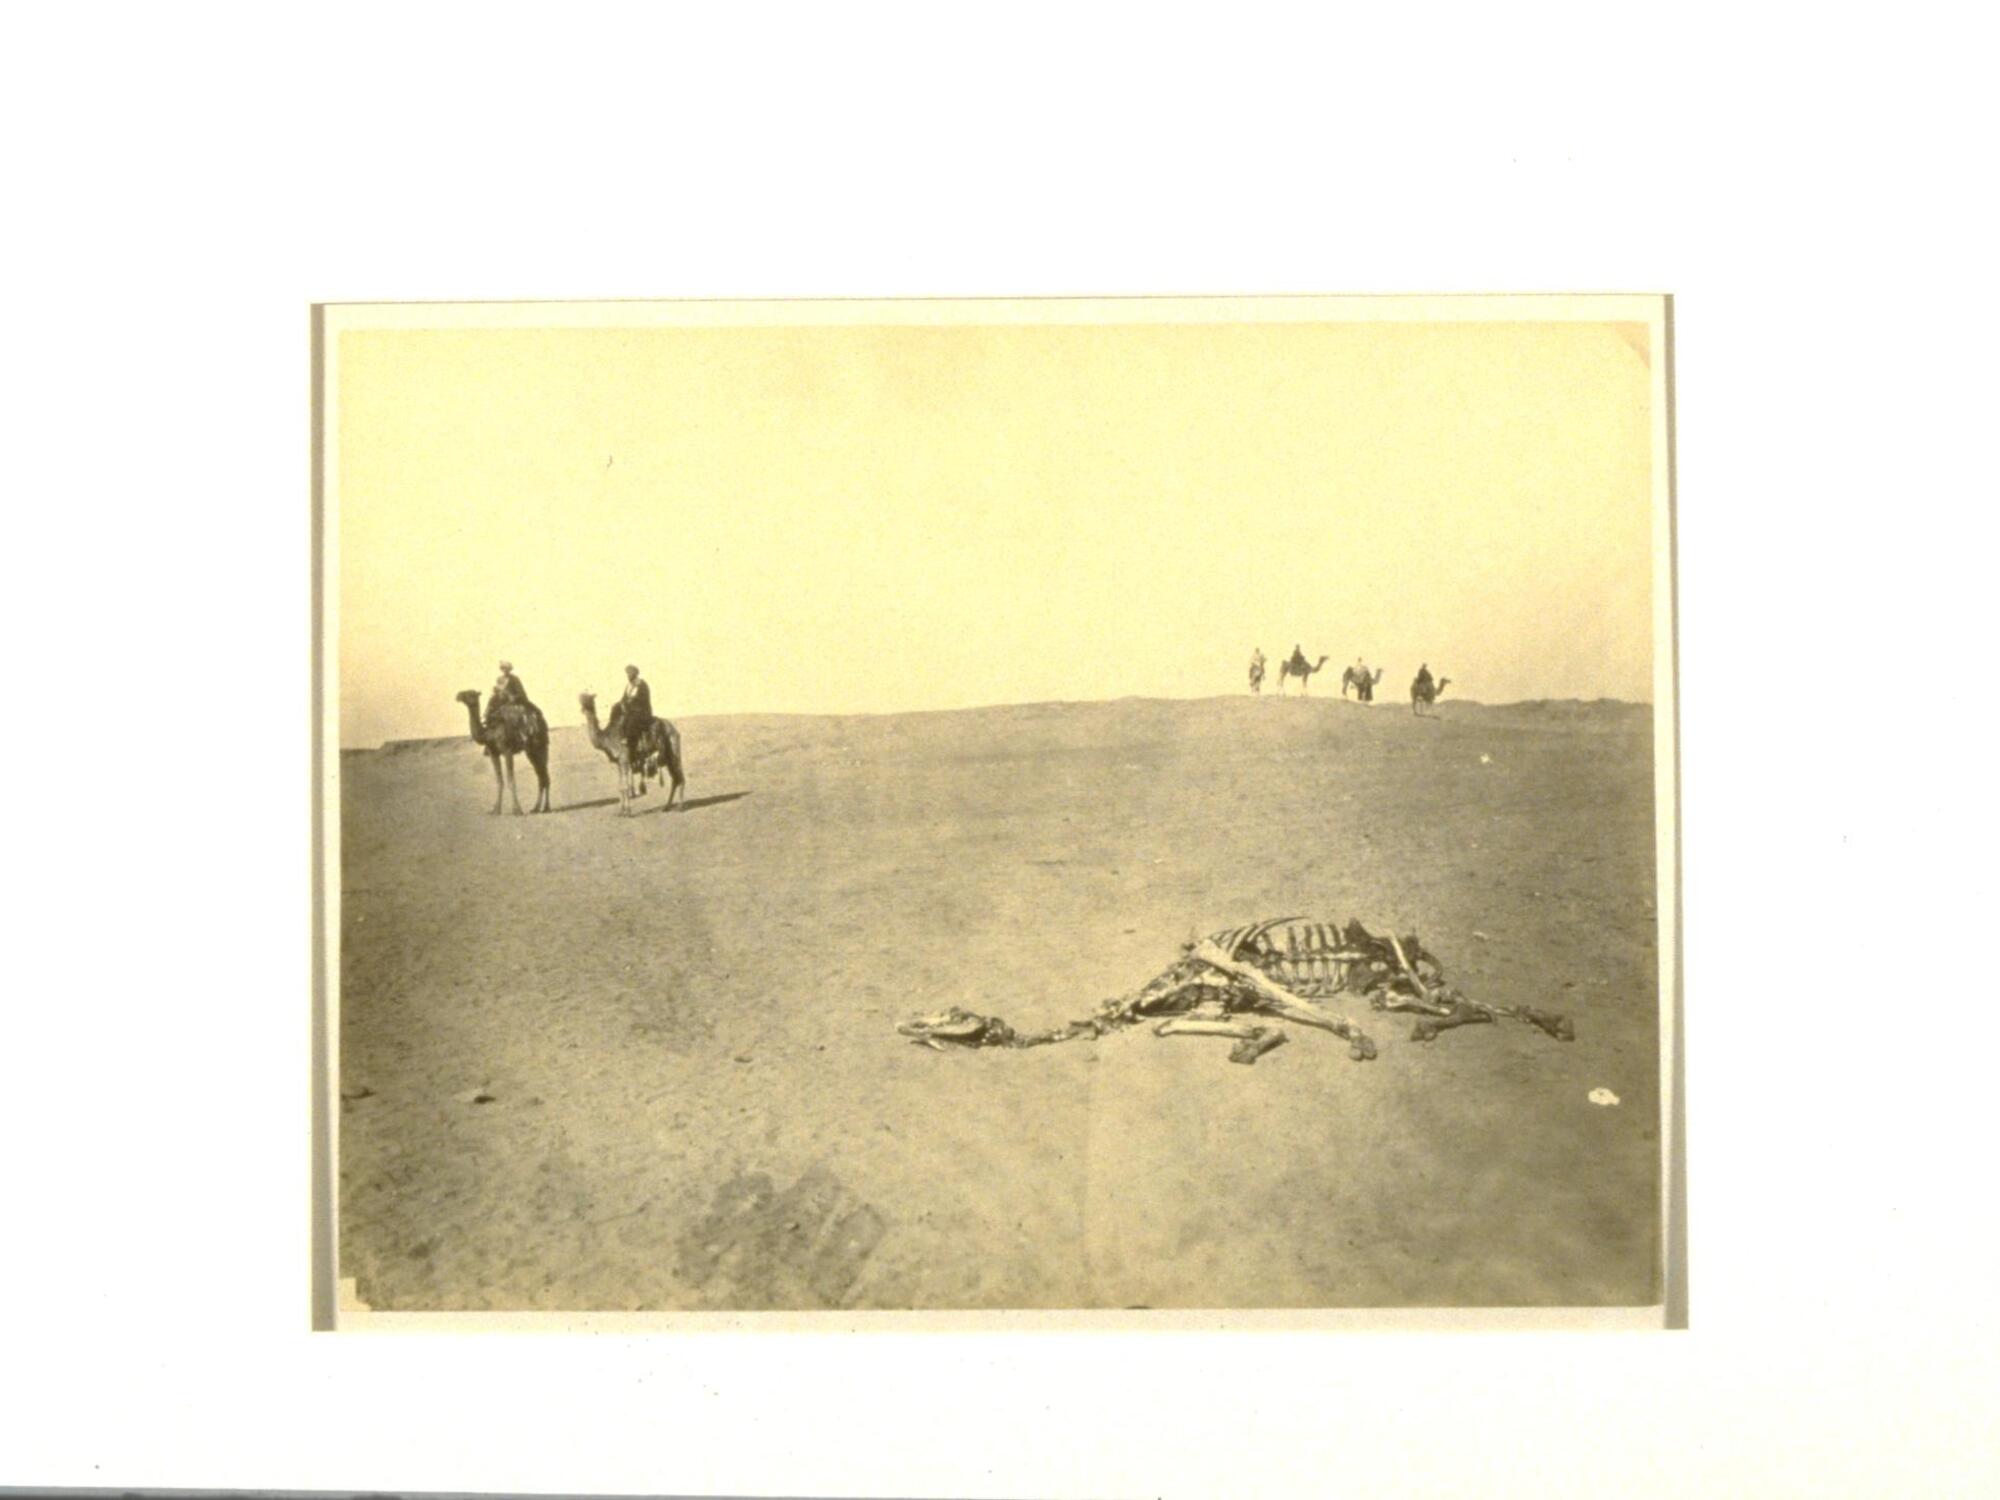 The skeleton of a camel lies in the foreground of this photograph, while scattered groupings of figures on camelback dot the desert landscape in the background. 